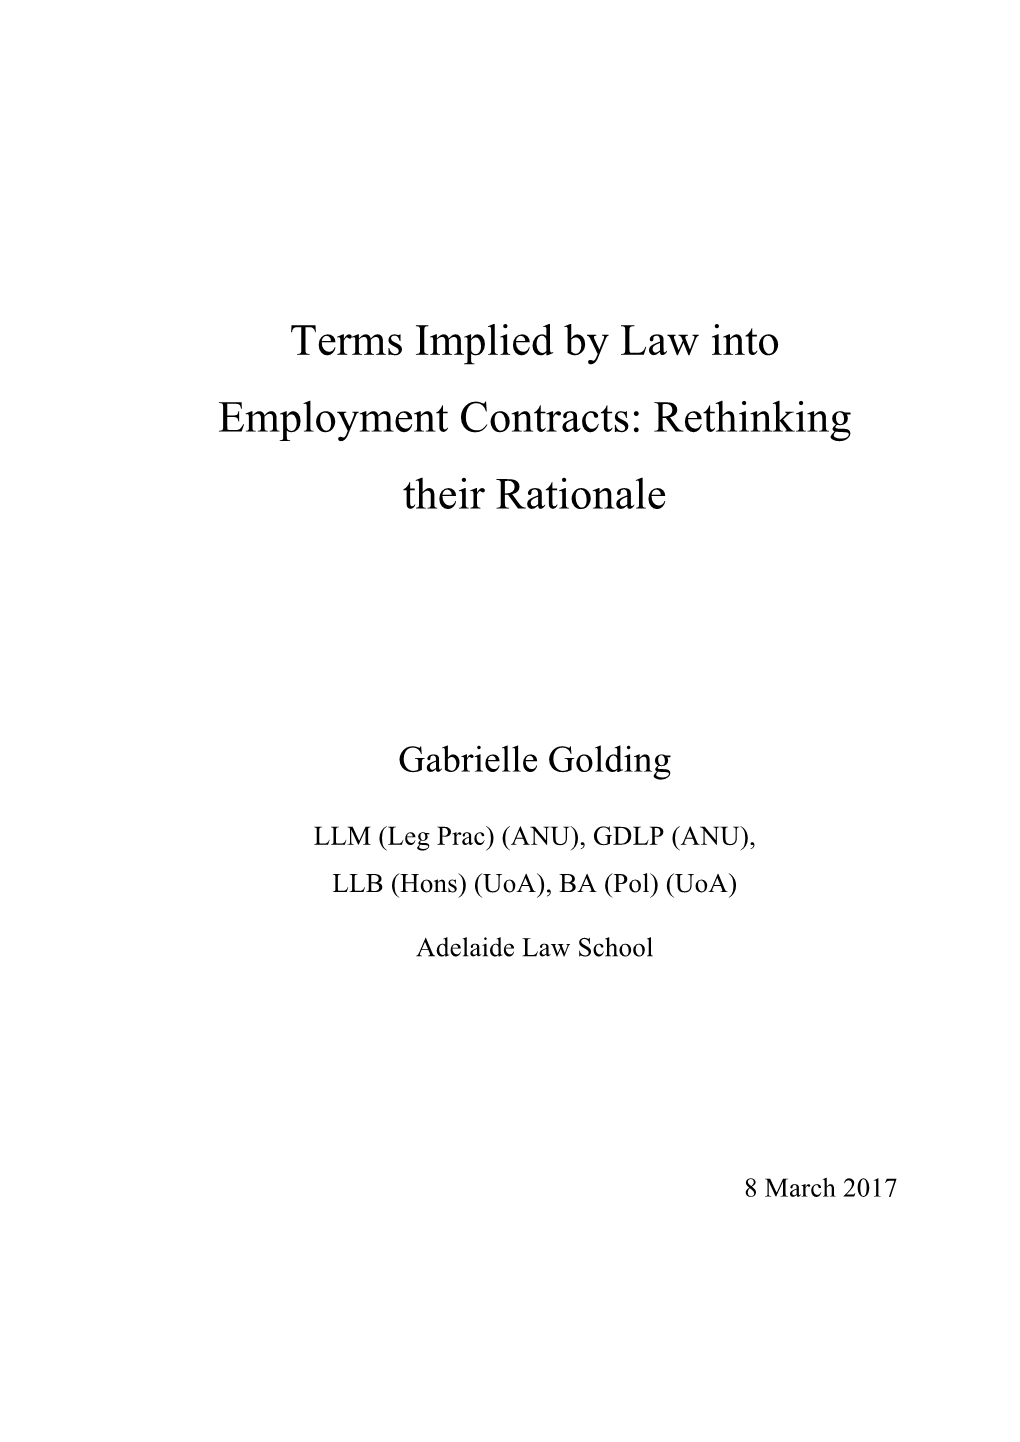 Terms Implied by Law Into Employment Contracts: Rethinking Their Rationale